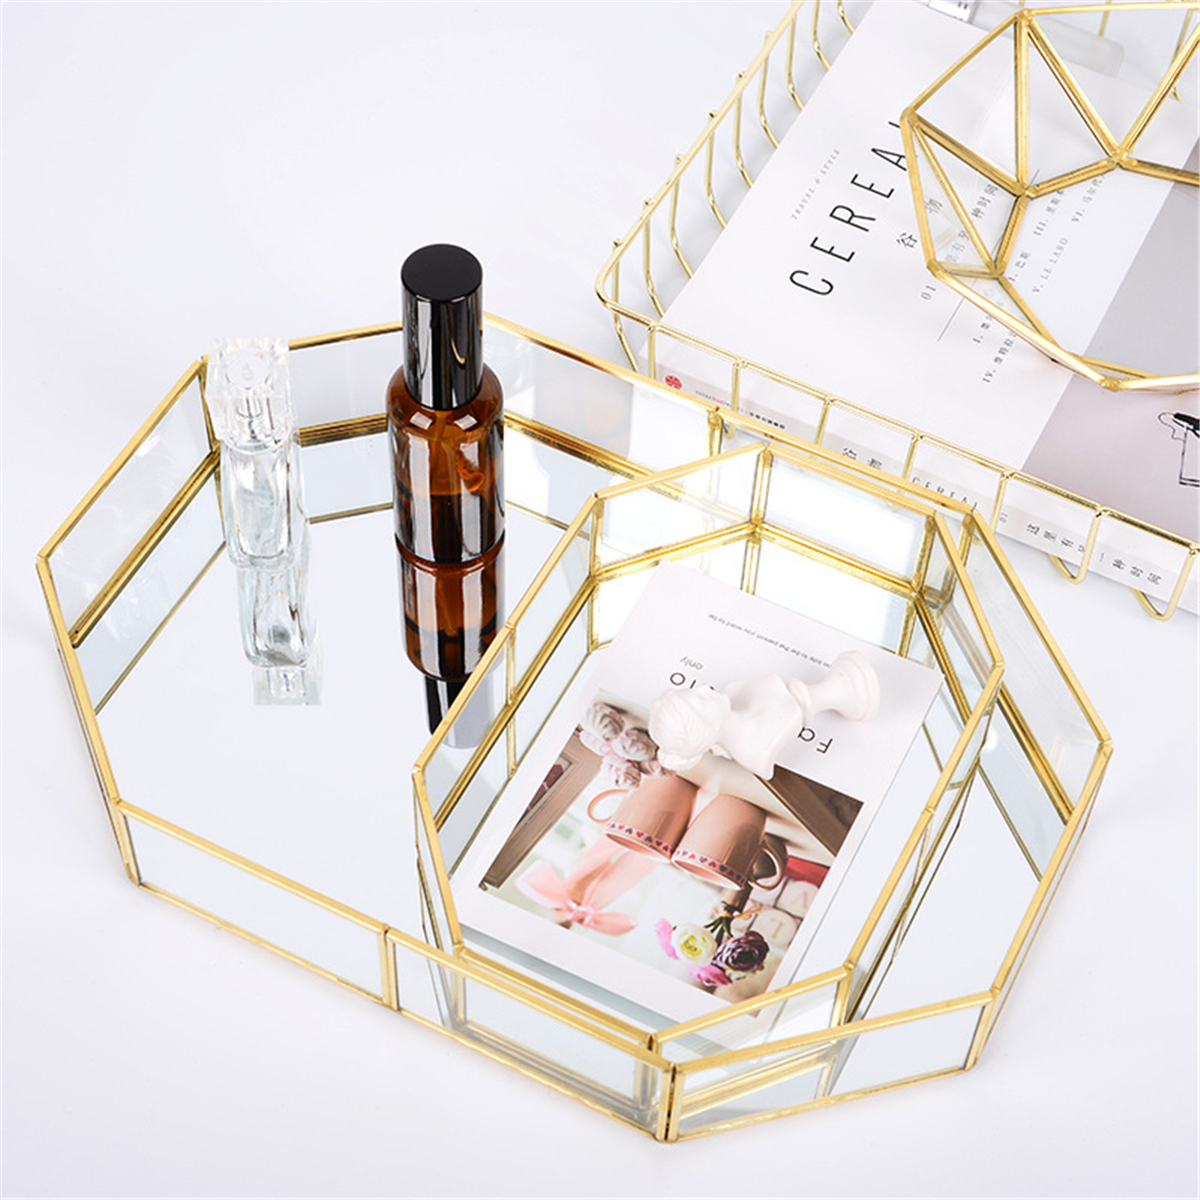 2-Size-Mirror-Glass-Tray-Octagon-Cosmetic-Makeup-Desktop-Organizer-Jewelry-Display-Stand-Holder-1382768-1